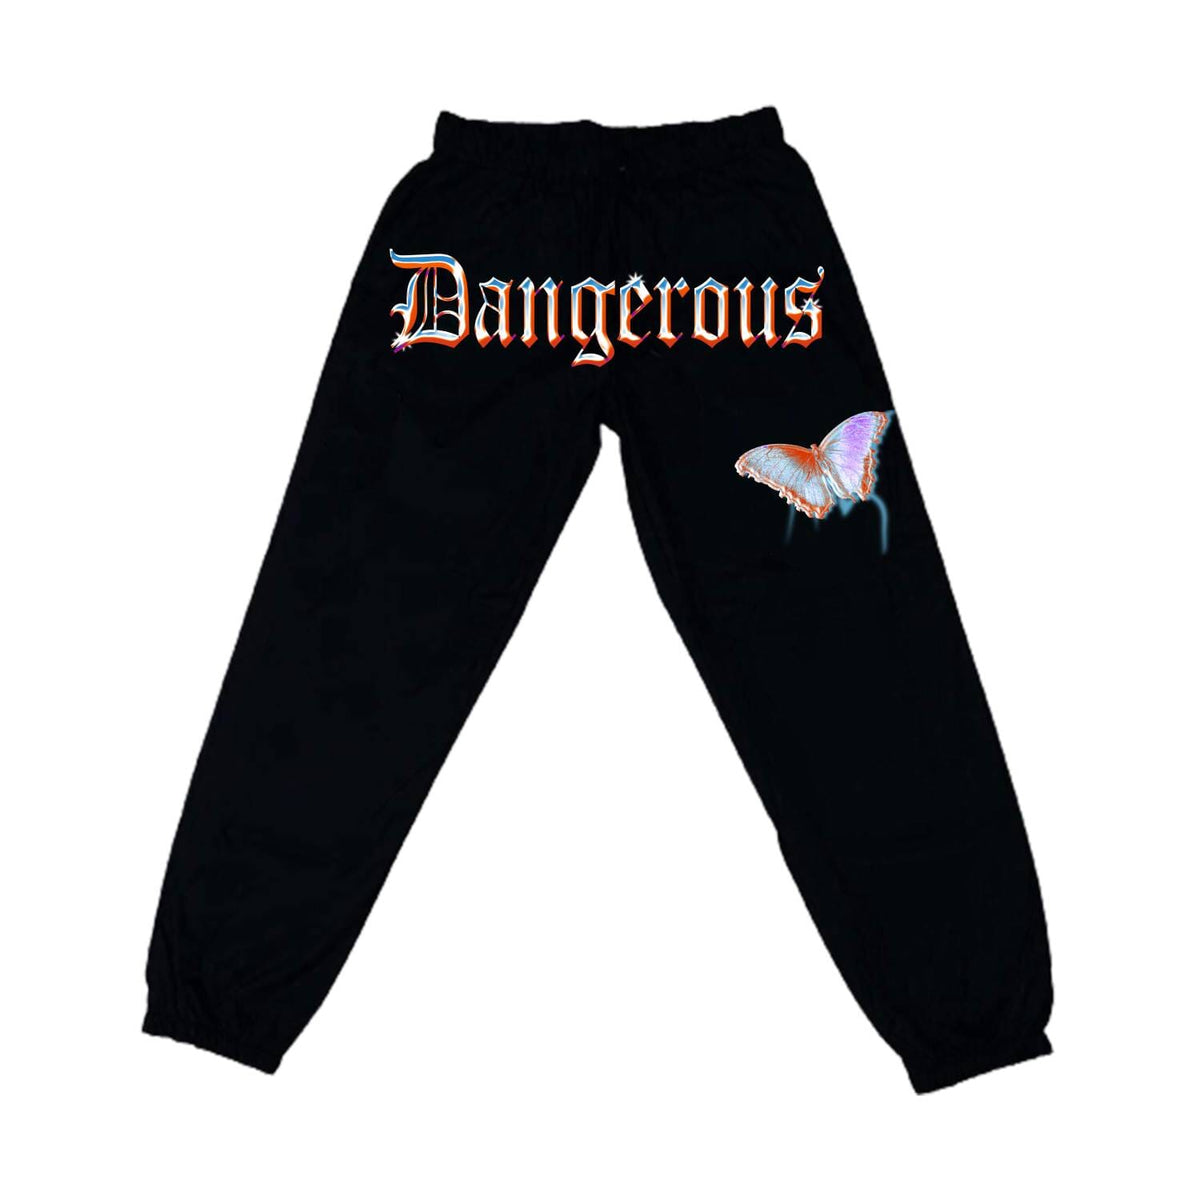 DANGER JOGGERS - BLACK JOGGERS Yours Truly Clothing